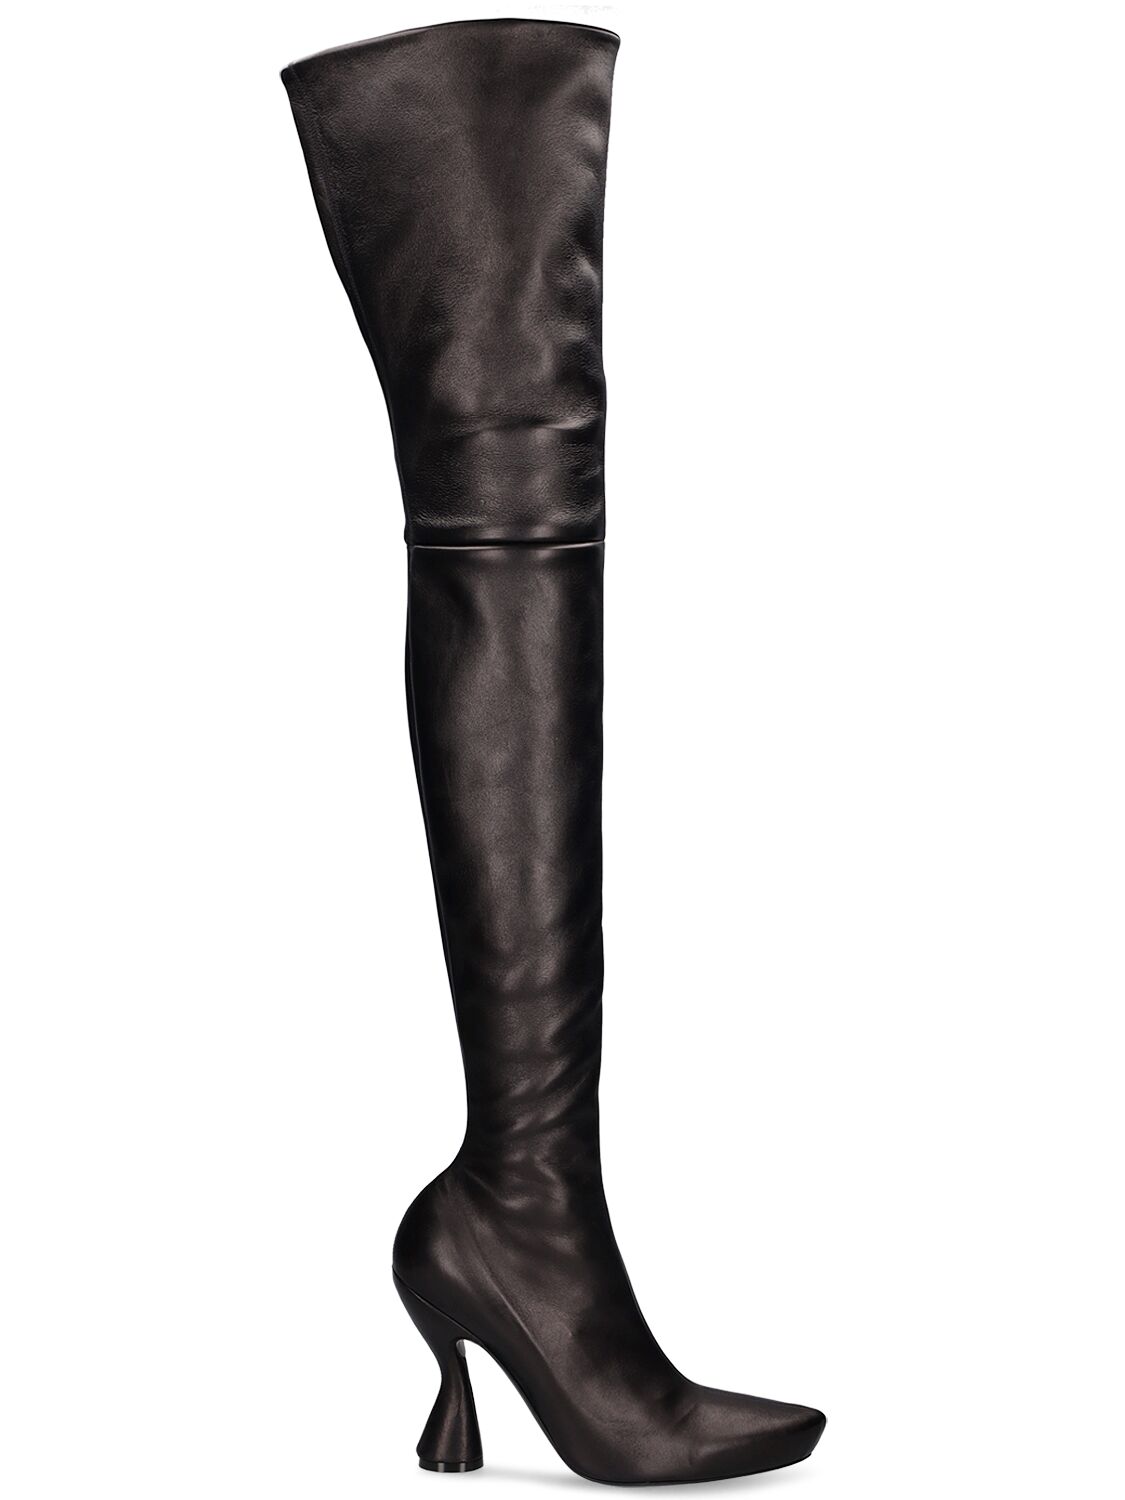 Image of 105mm Muse Knee High Leather Boots